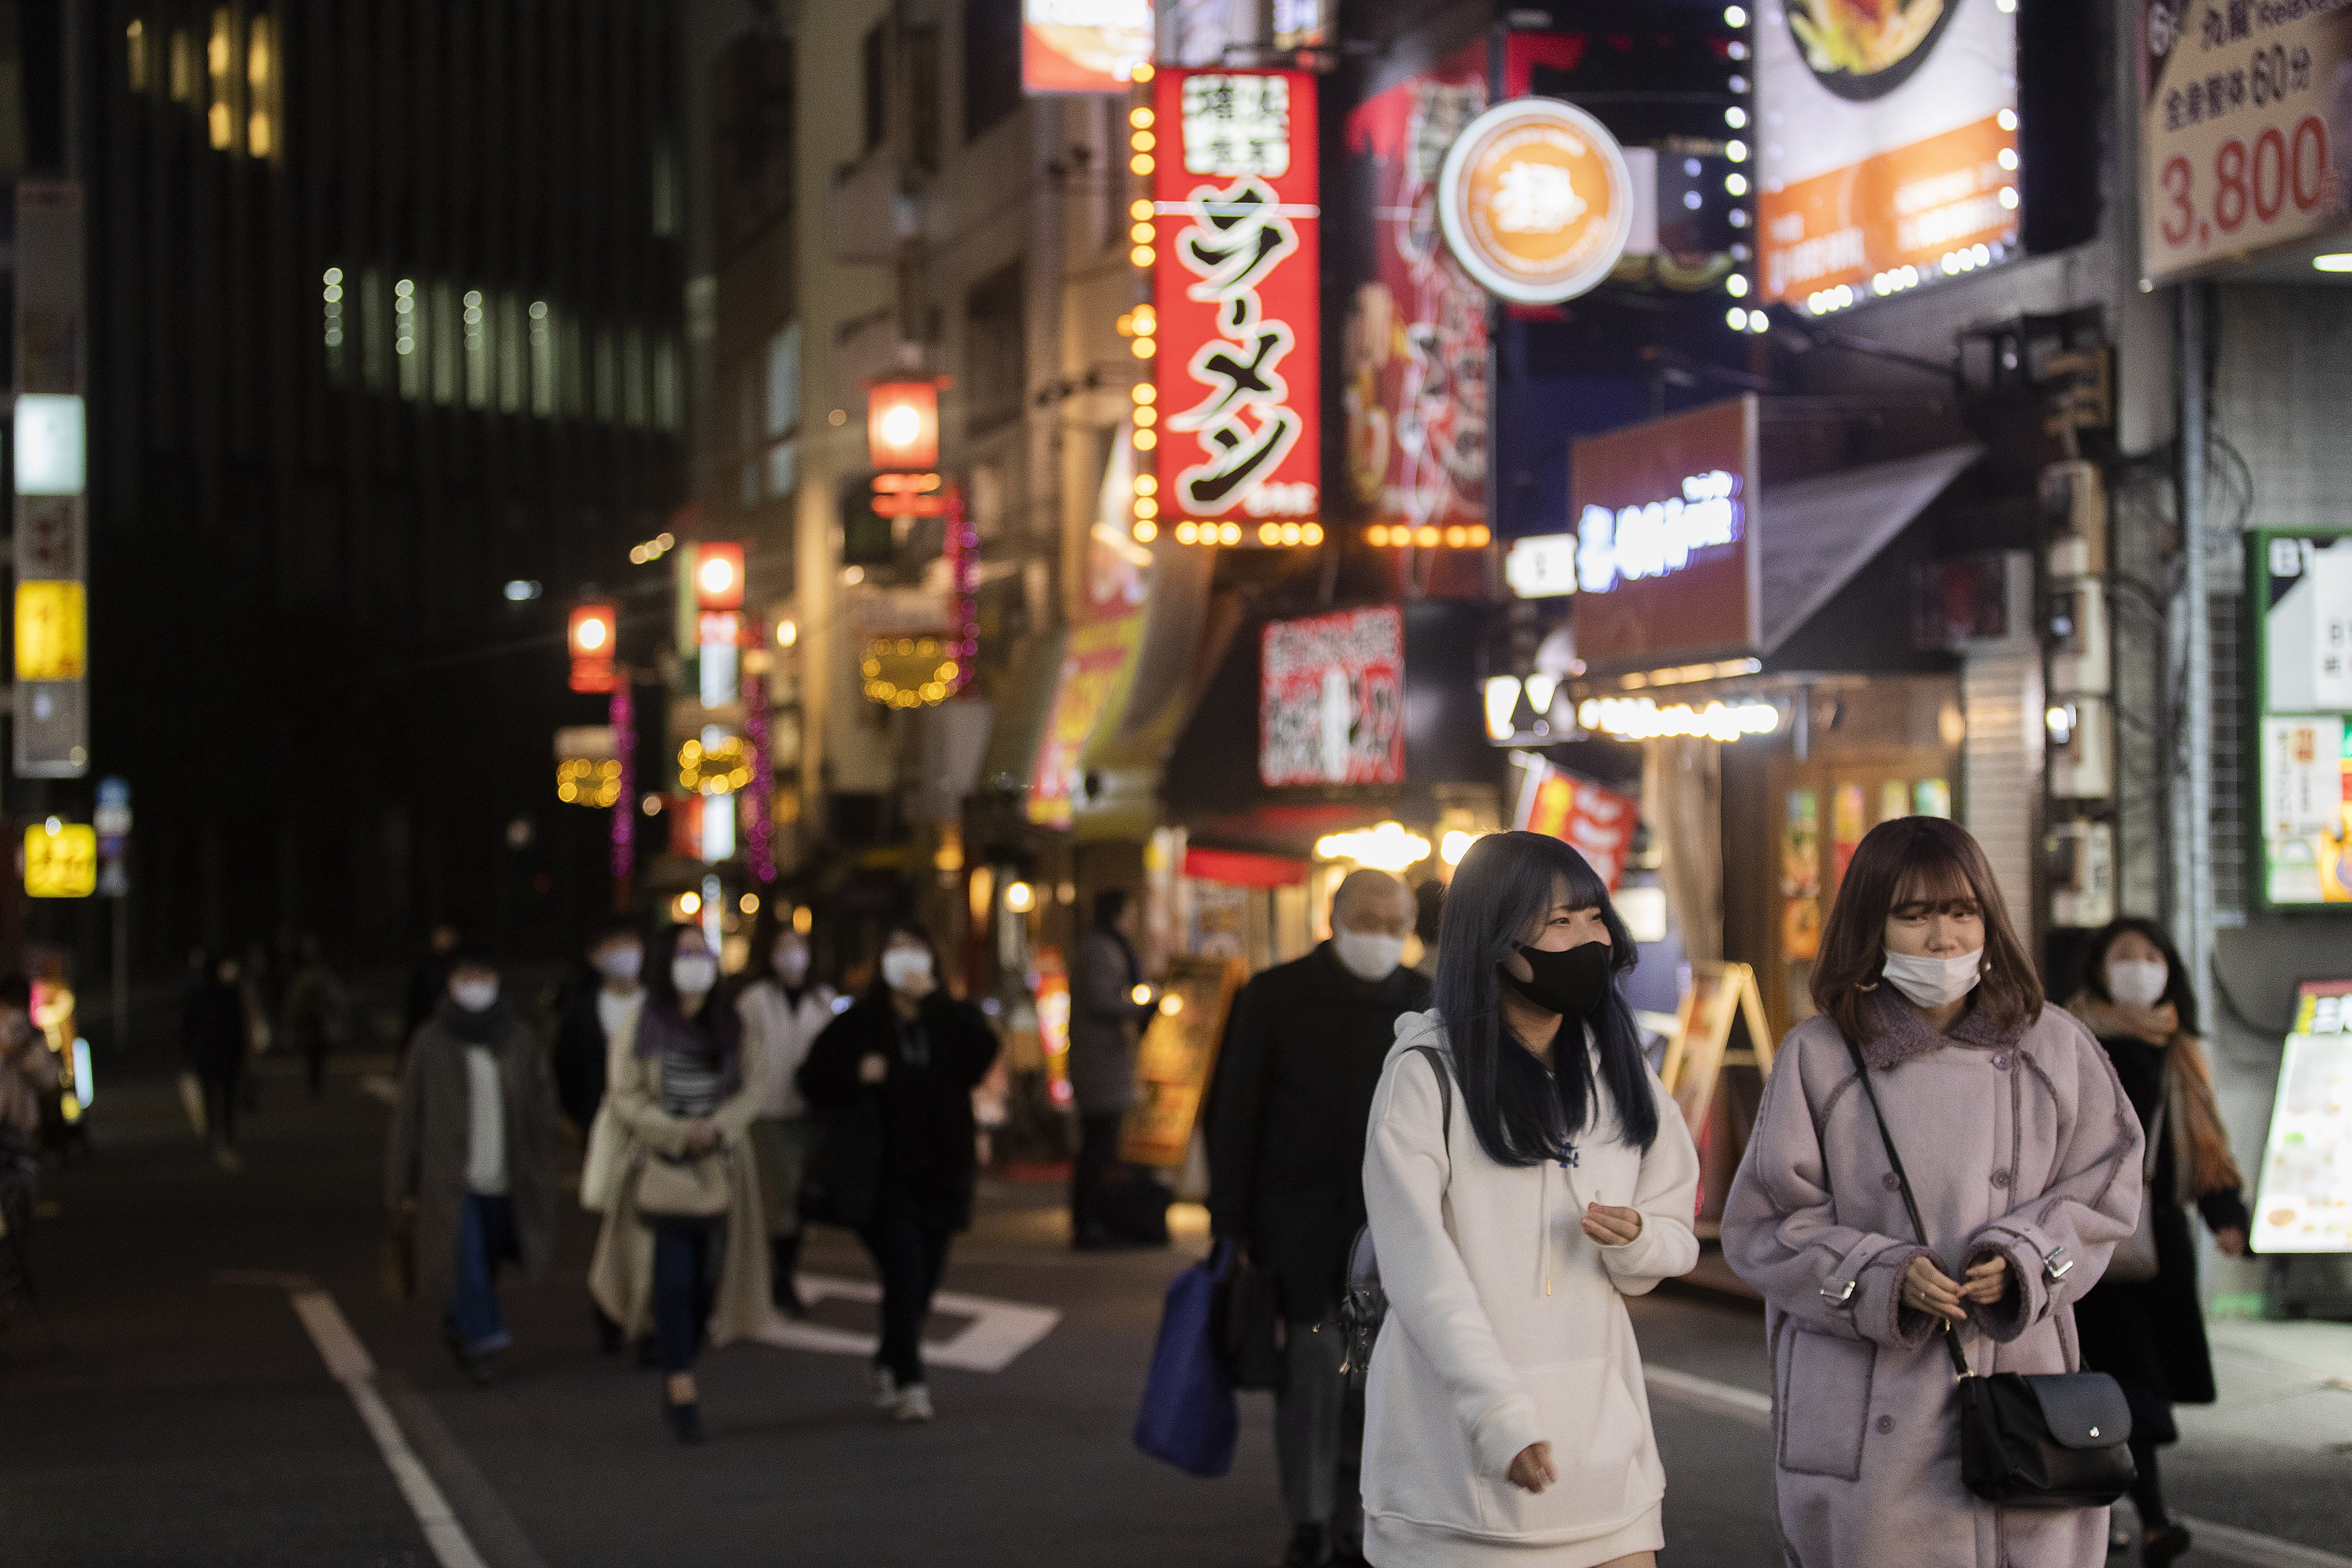 People wearing face masks walk on a street filled with restaurants and bars during a coronavirus state of emergency in Tokyo. Photo: AP